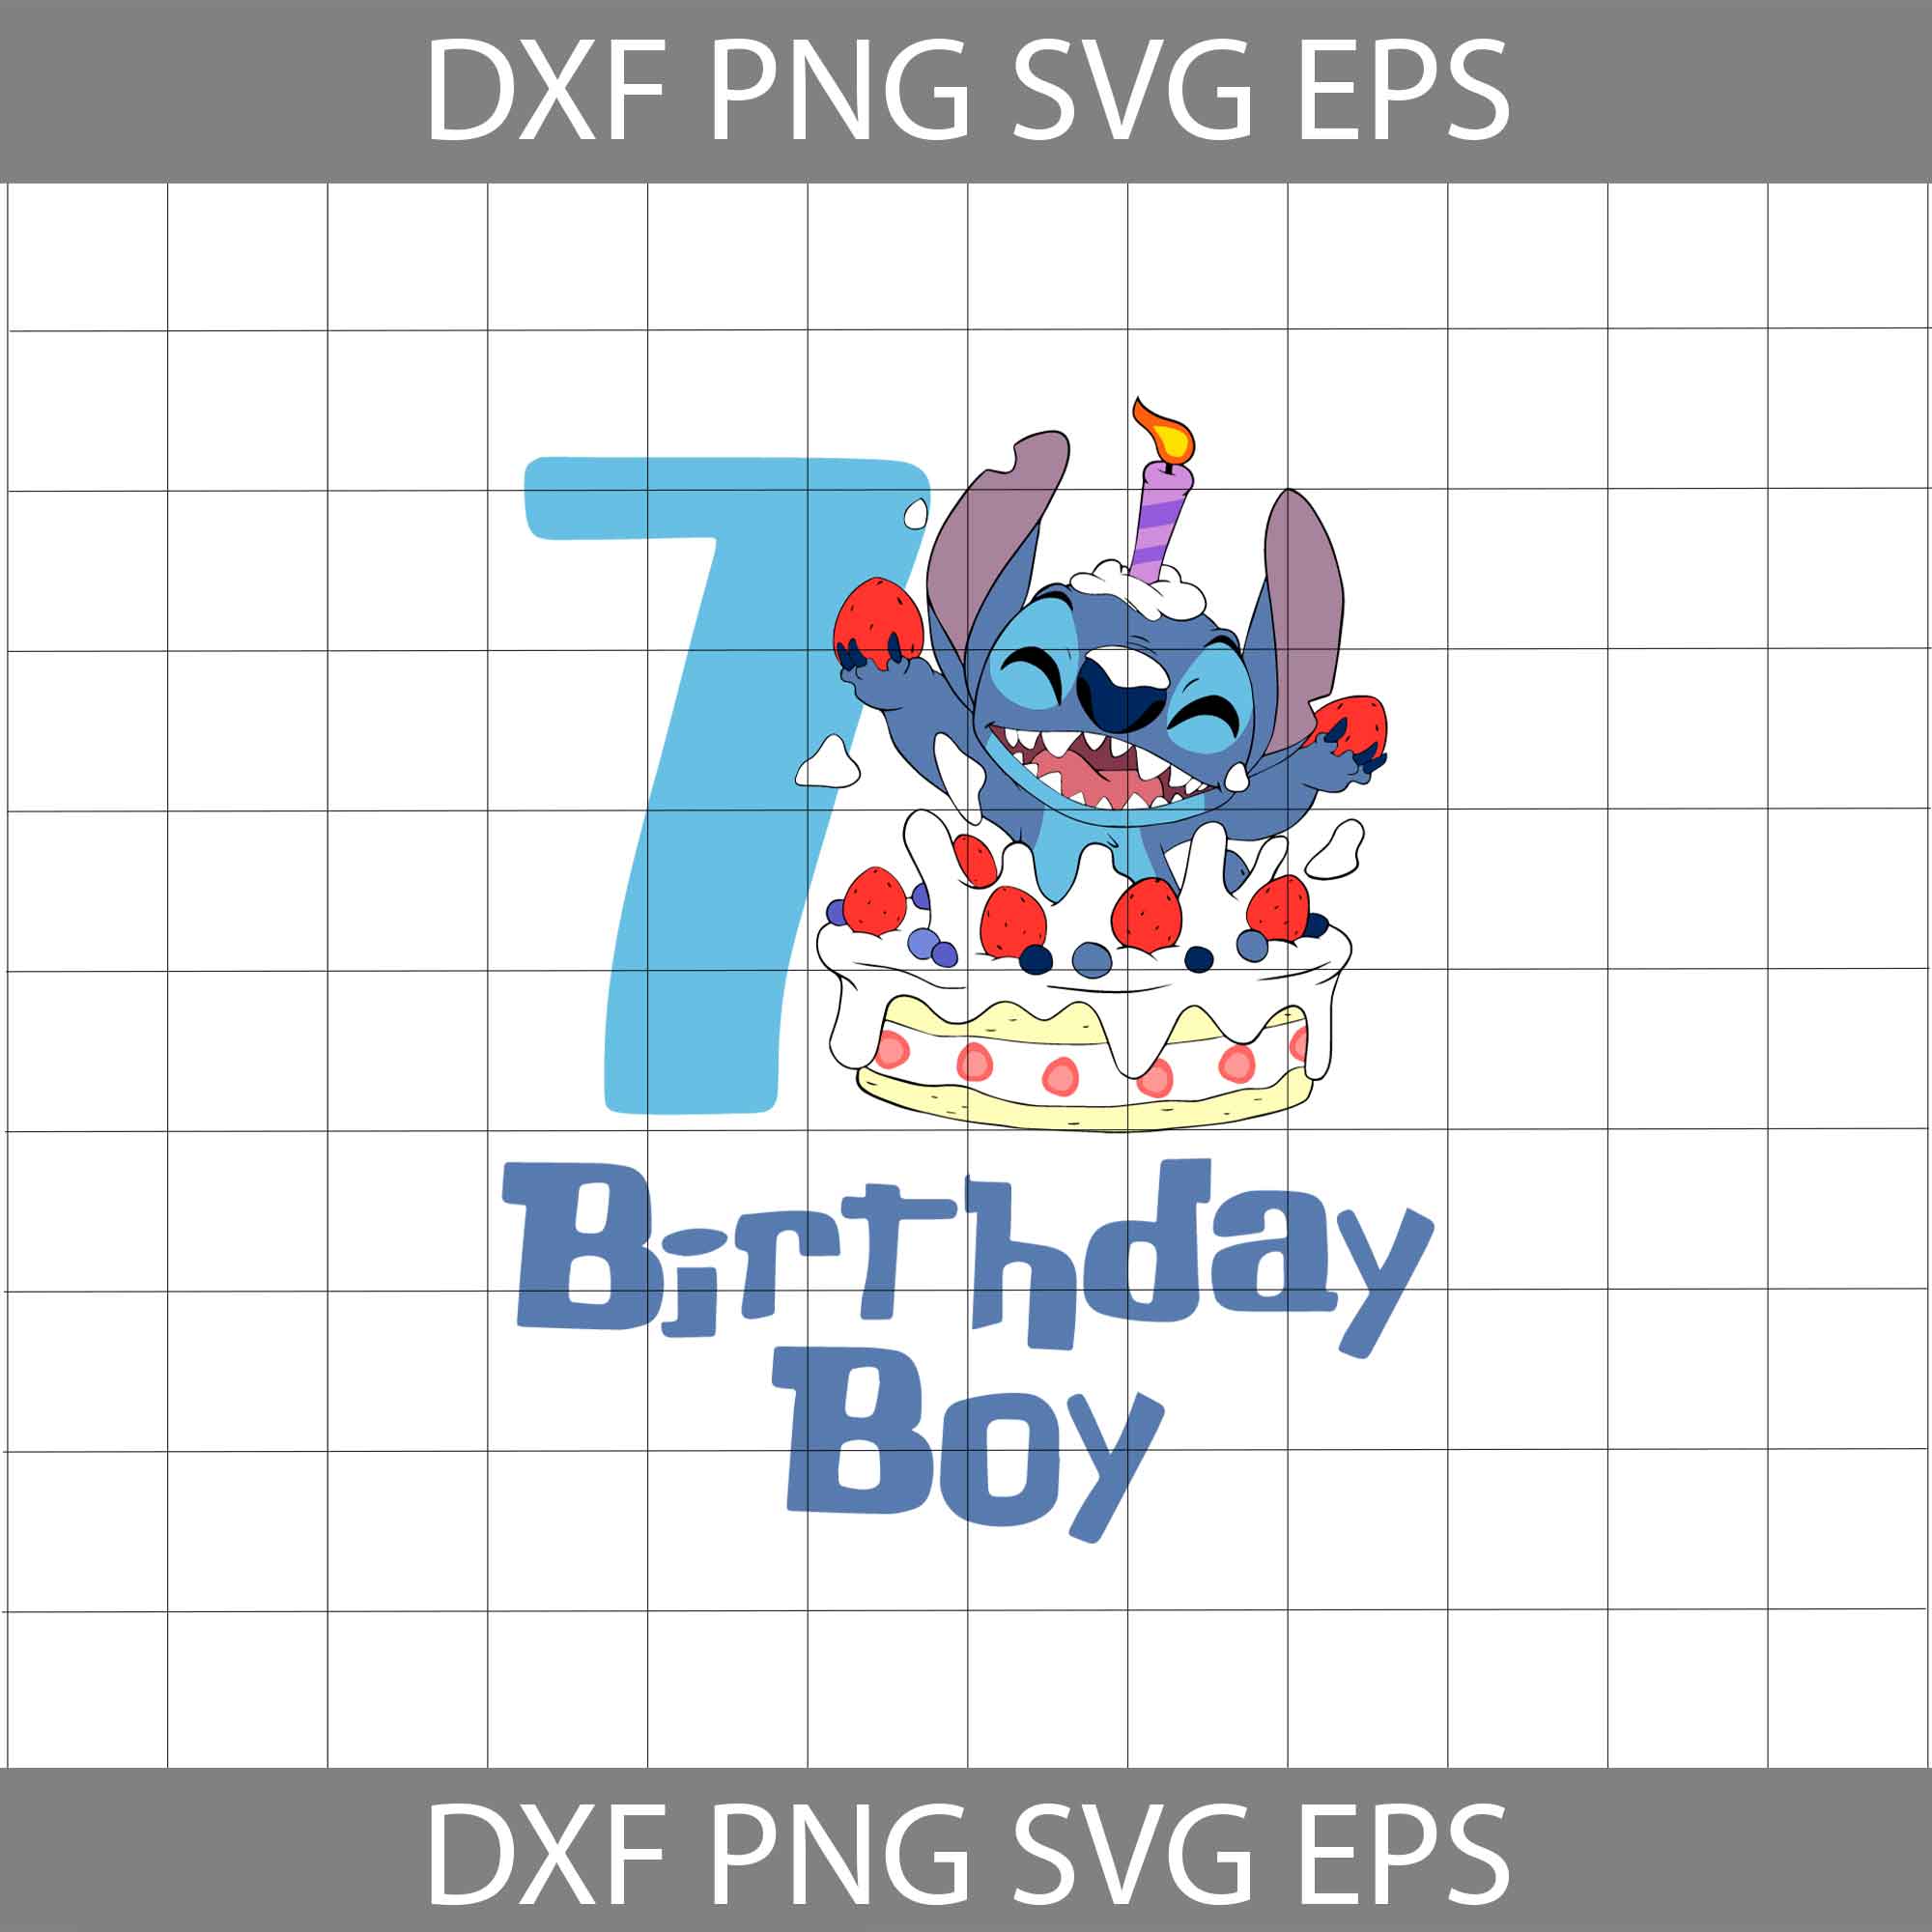 It's My Birthday Stitch Sublimation PNG